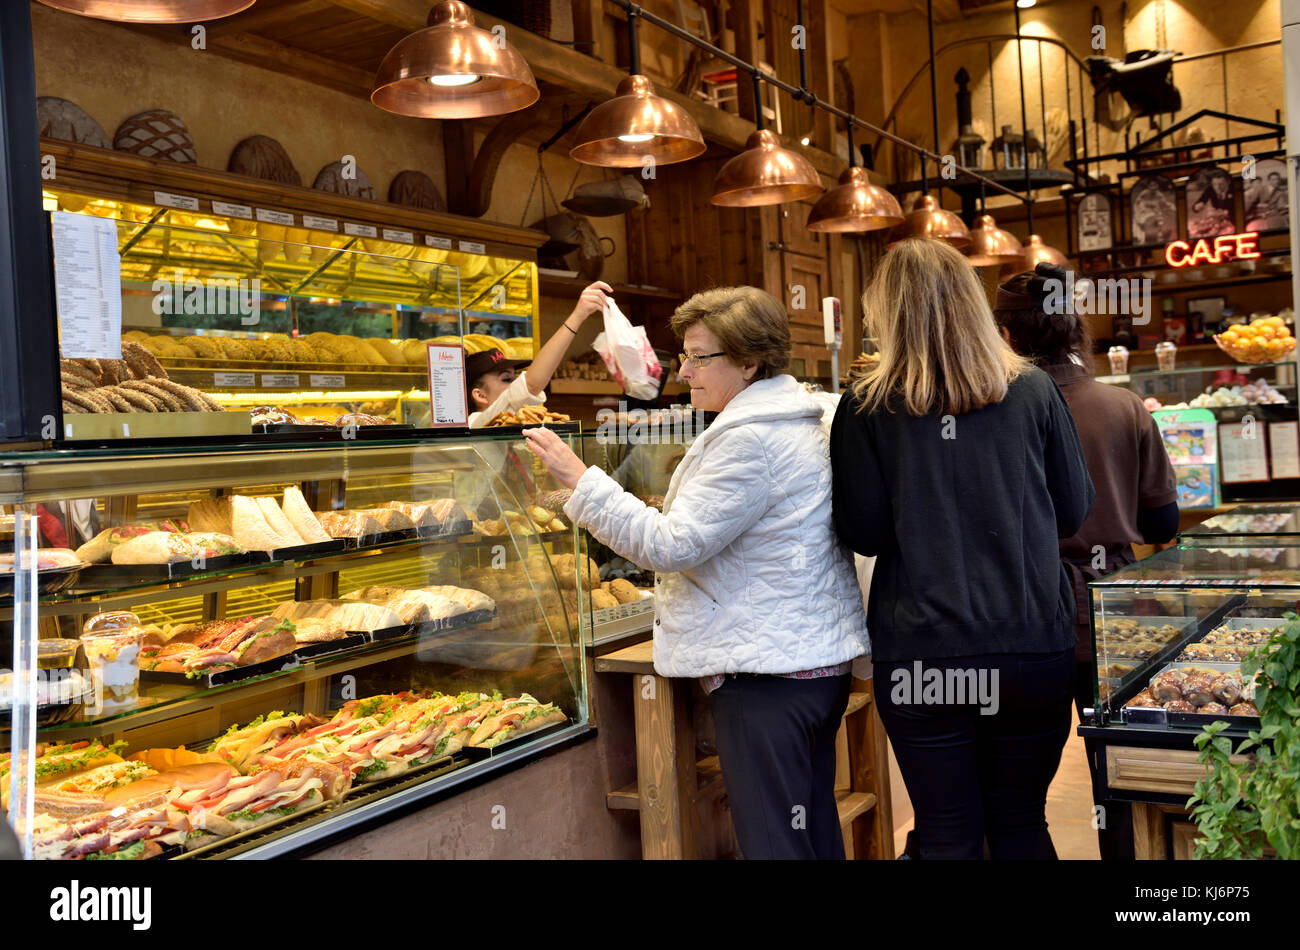 Woman inside of Greek bakery shop cafe selecting sandwich from display, Athens, Greece Stock Photo